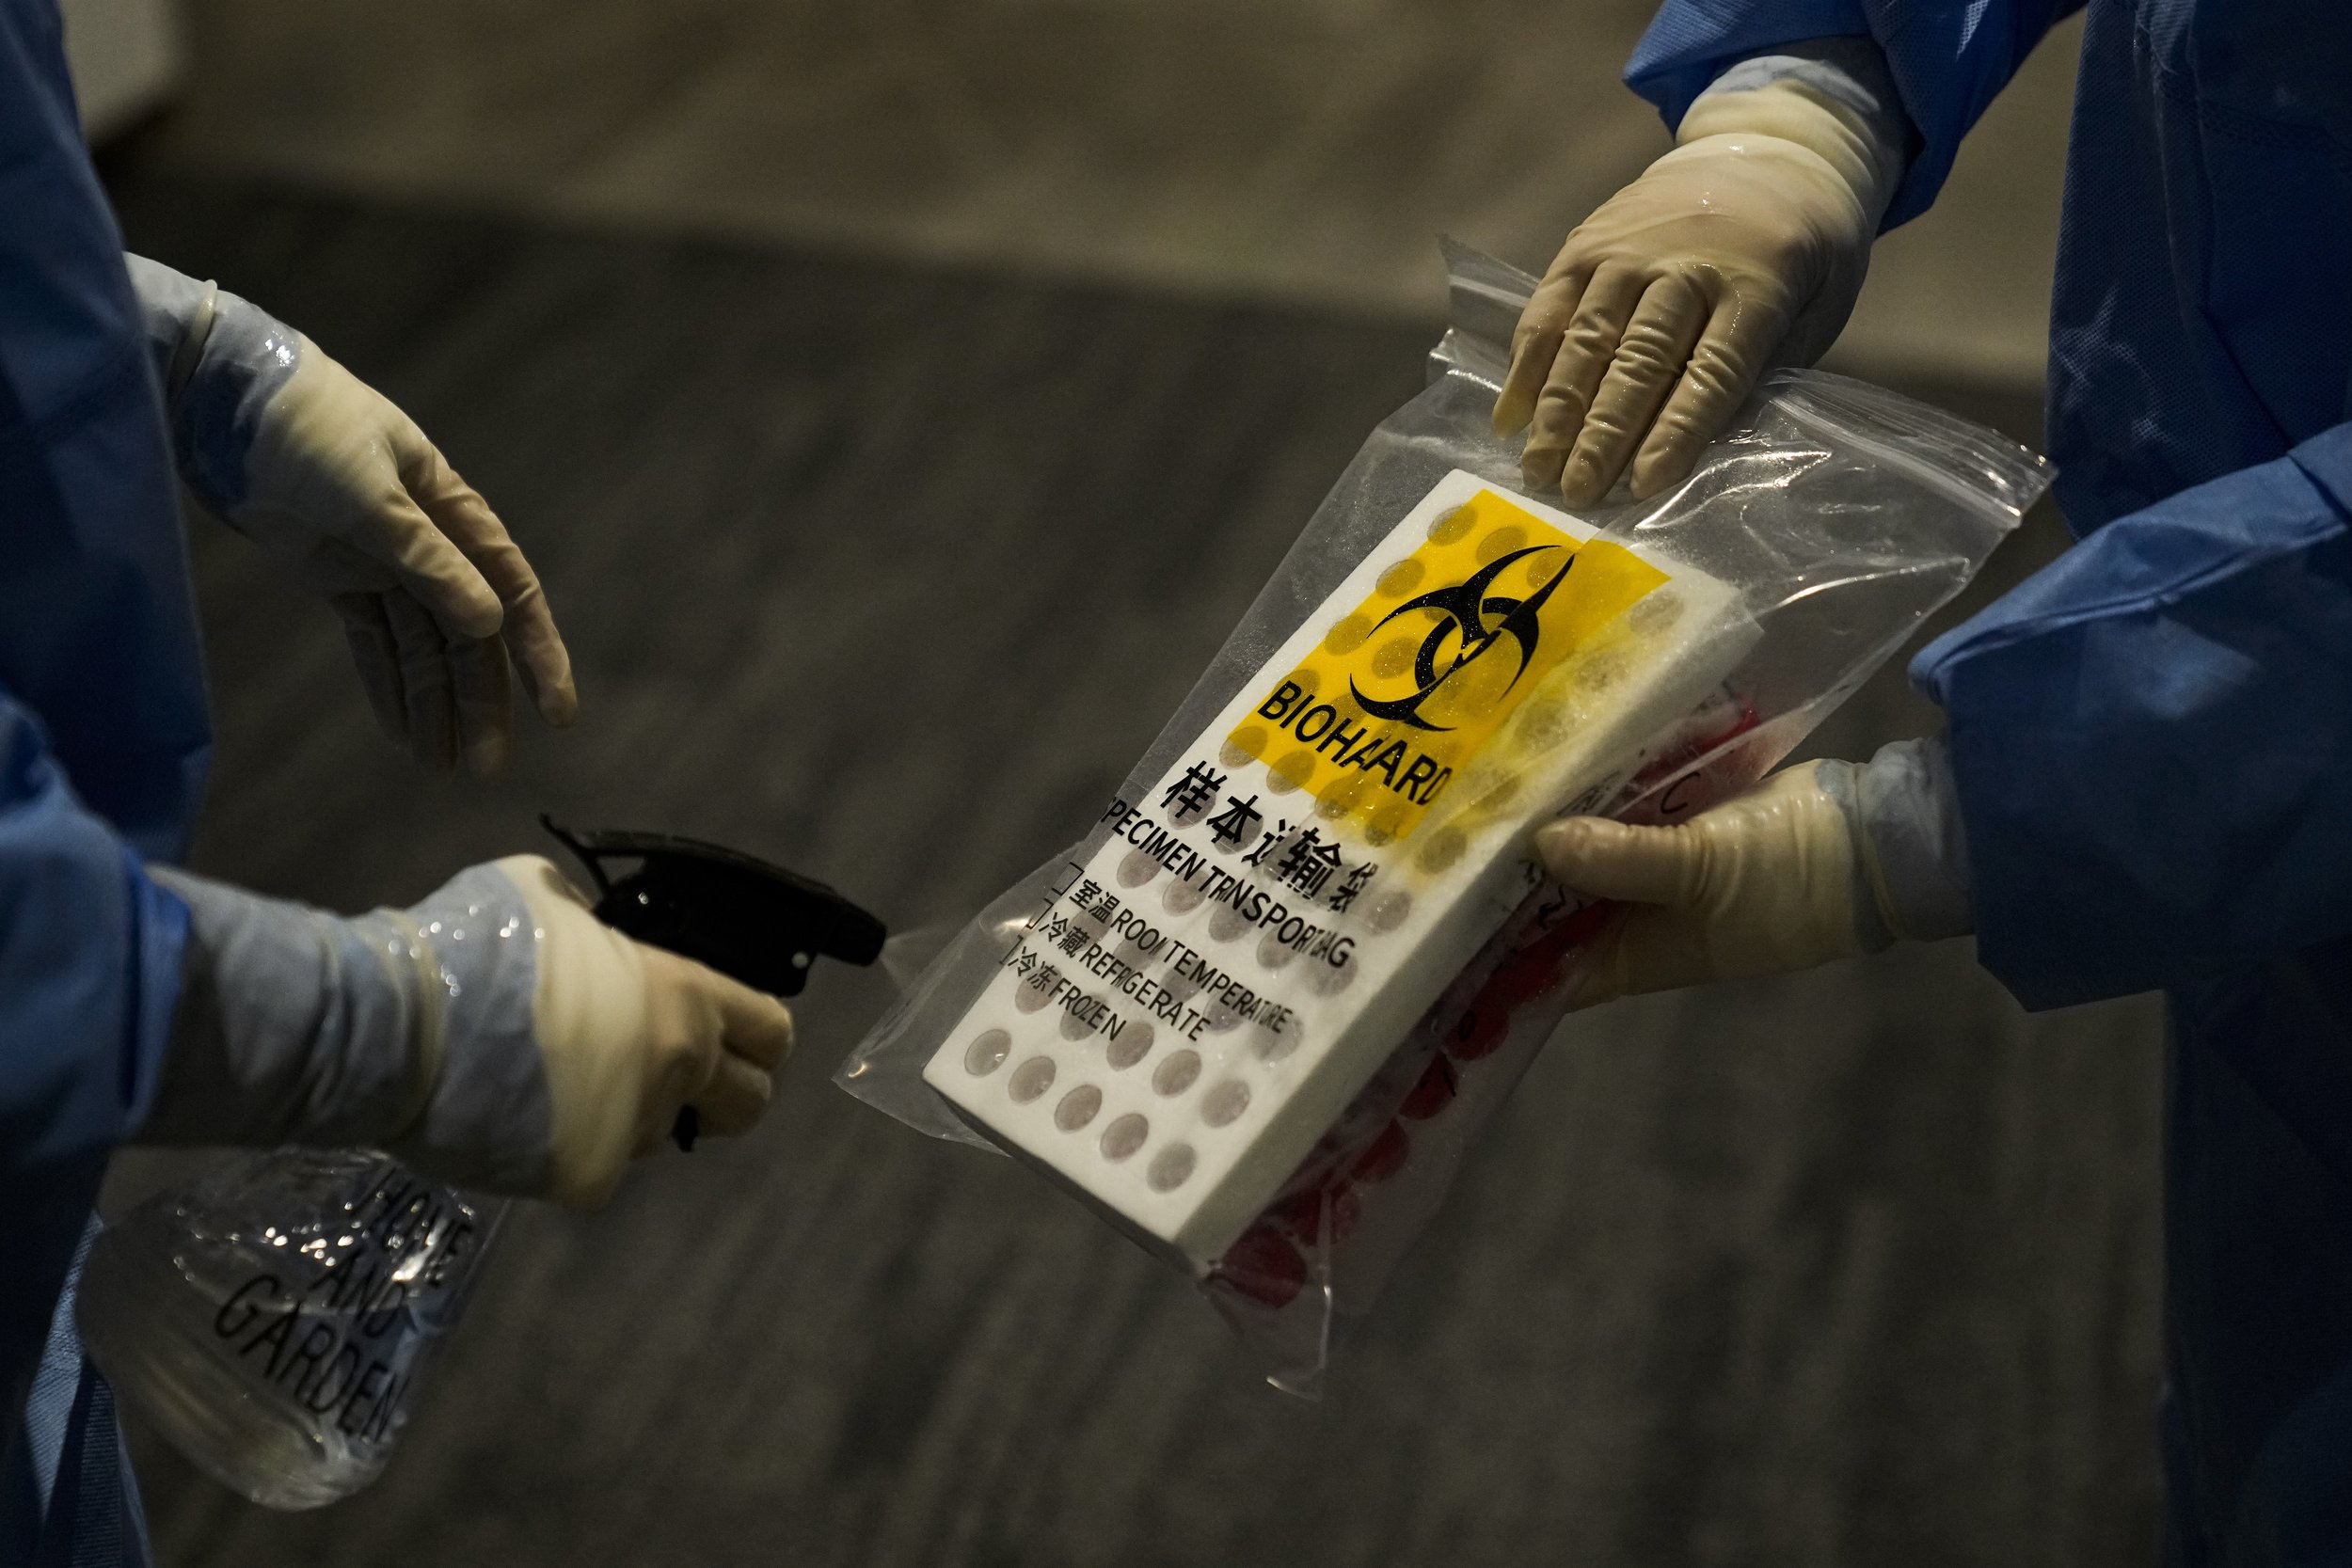  A medical worker sprays disinfectant on a plastic bag containing samples collected for COVID testing in the main media center at the 2022 Winter Olympics, Friday, Feb. 11, 2022, in Beijing. (AP Photo/Jae C. Hong) 